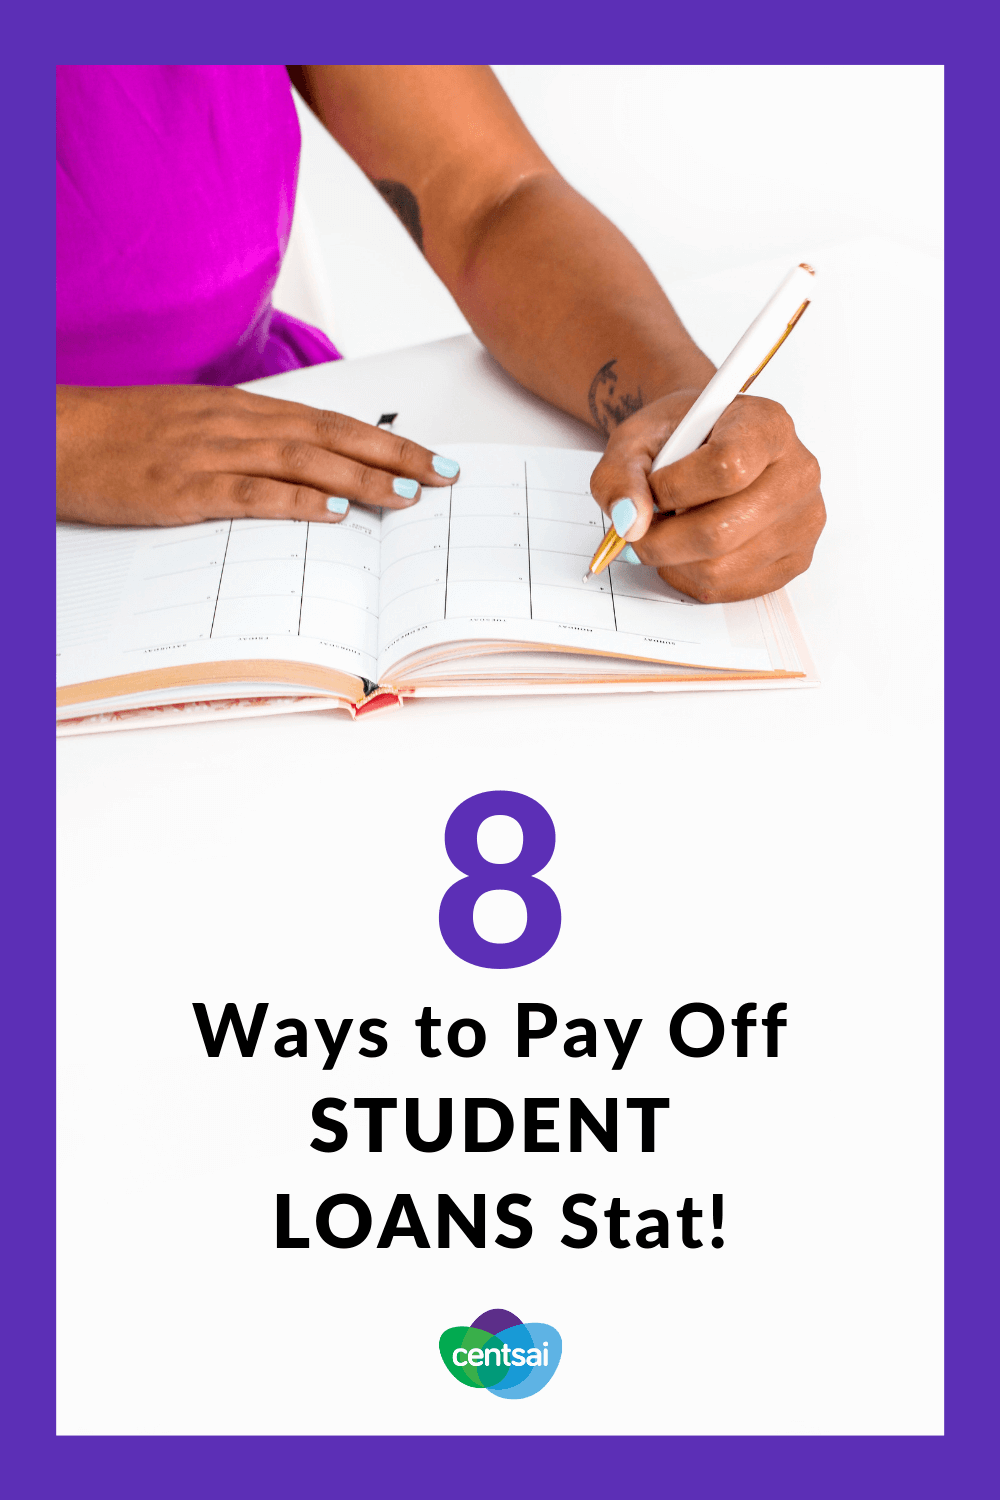 8 Ways to Pay Off Student Loans Stat! Does your student loan debt feel like a ball and chain dragging you down? Check out ways to pay off student loans and get rid of that weight. #studentloandebt #studentloans #studentloanspayingoff